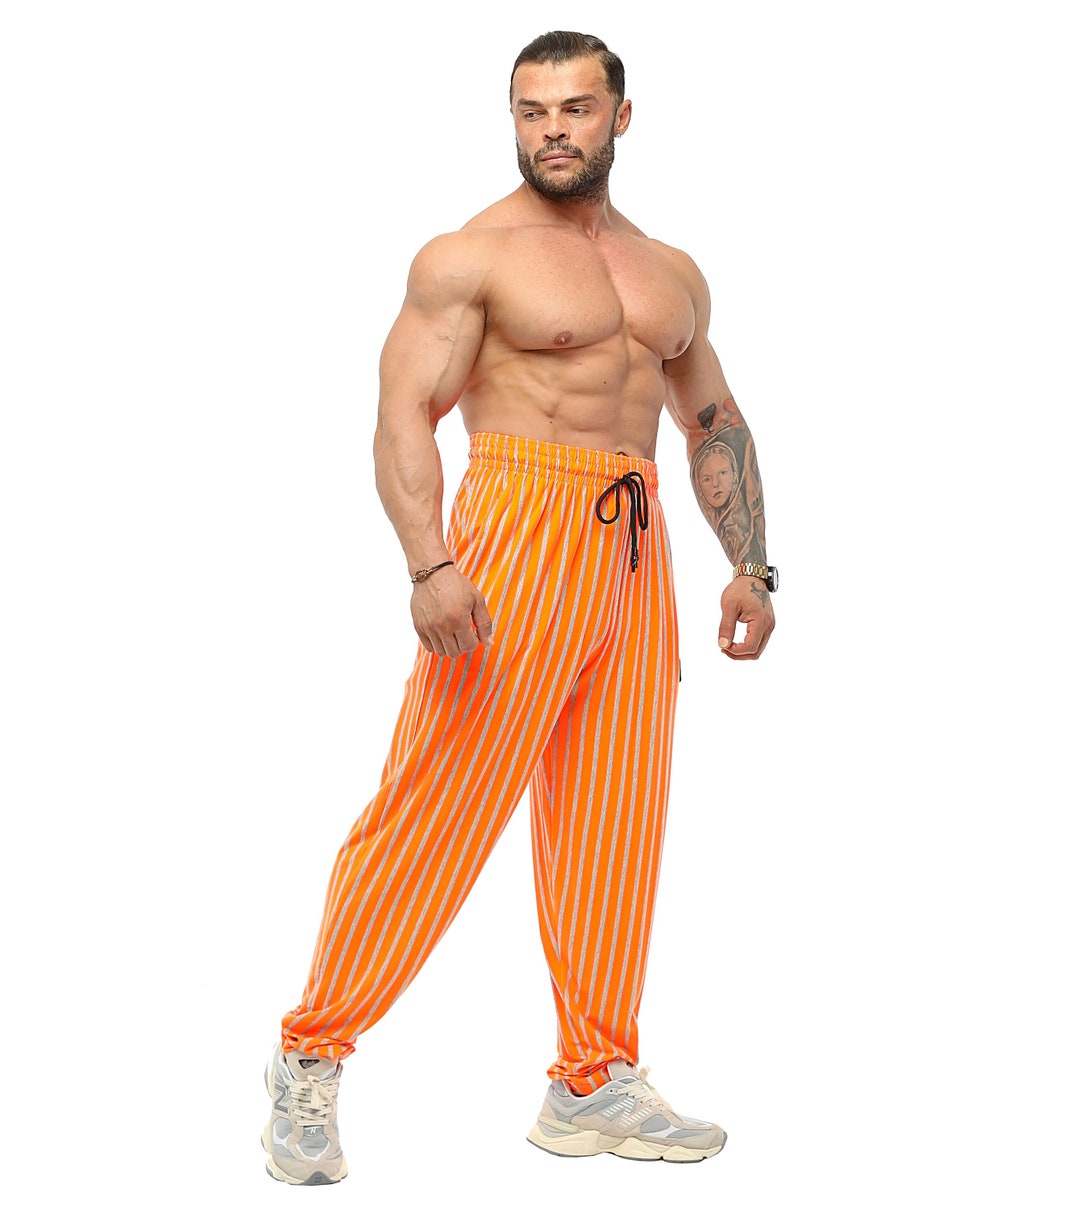 Men's Baggy Sweatpants with Pockets, Oldschool Loose Fit Gym Muscle Pants  Gift For Bodybuilders